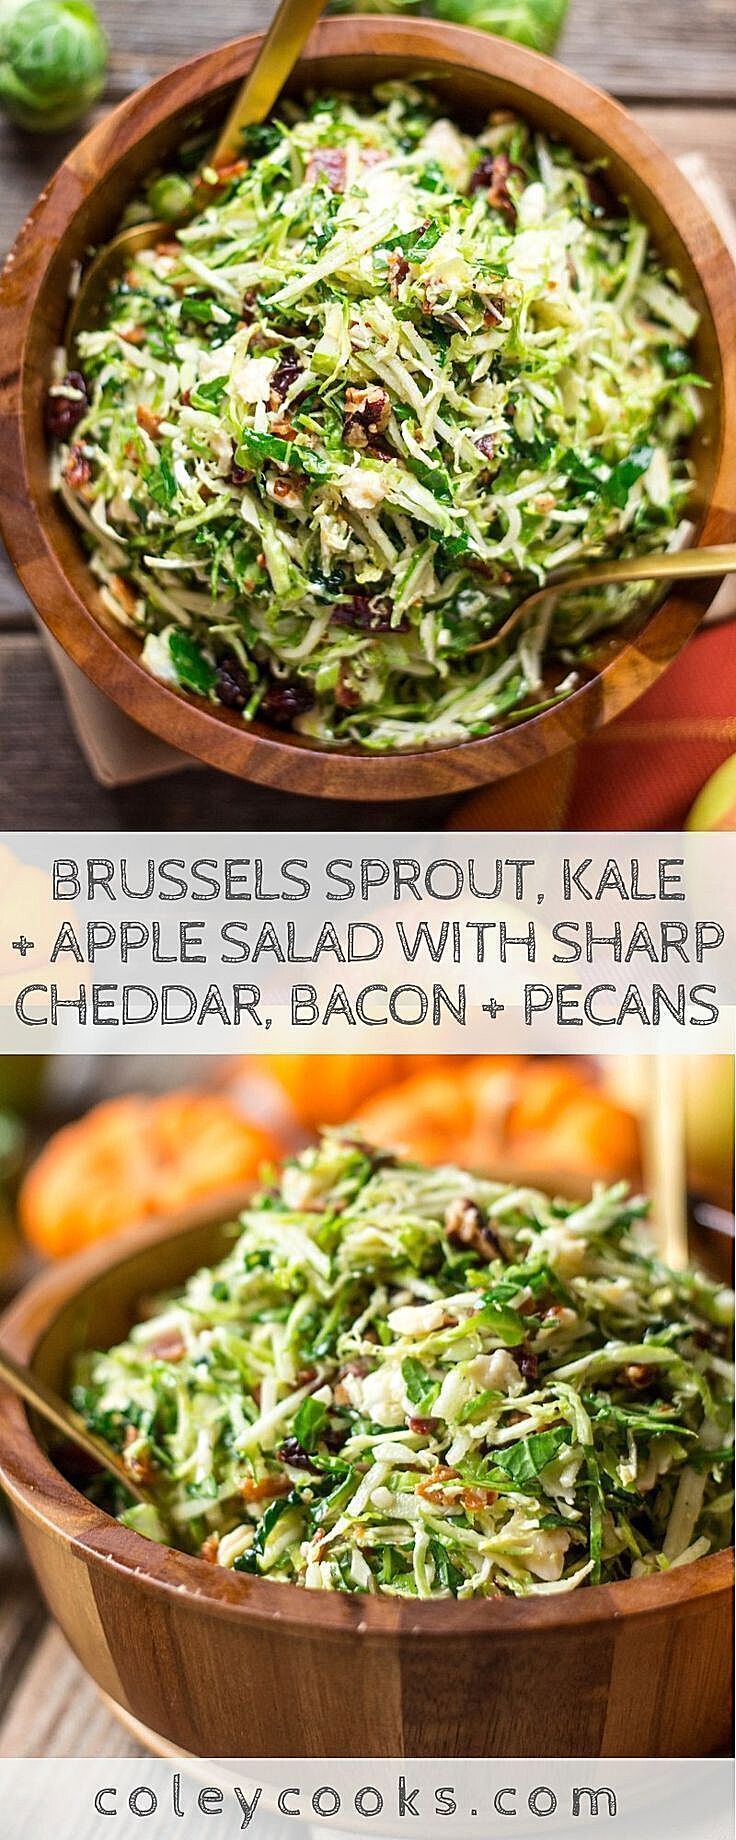 Brussels Sprout, Kale + Apple Salad (with Sharp Cheddar, Bacon + Pecans) - Brussels Sprout, Kale + Apple Salad (with Sharp Cheddar, Bacon + Pecans) -   19 thanksgiving recipes appetizers healthy ideas